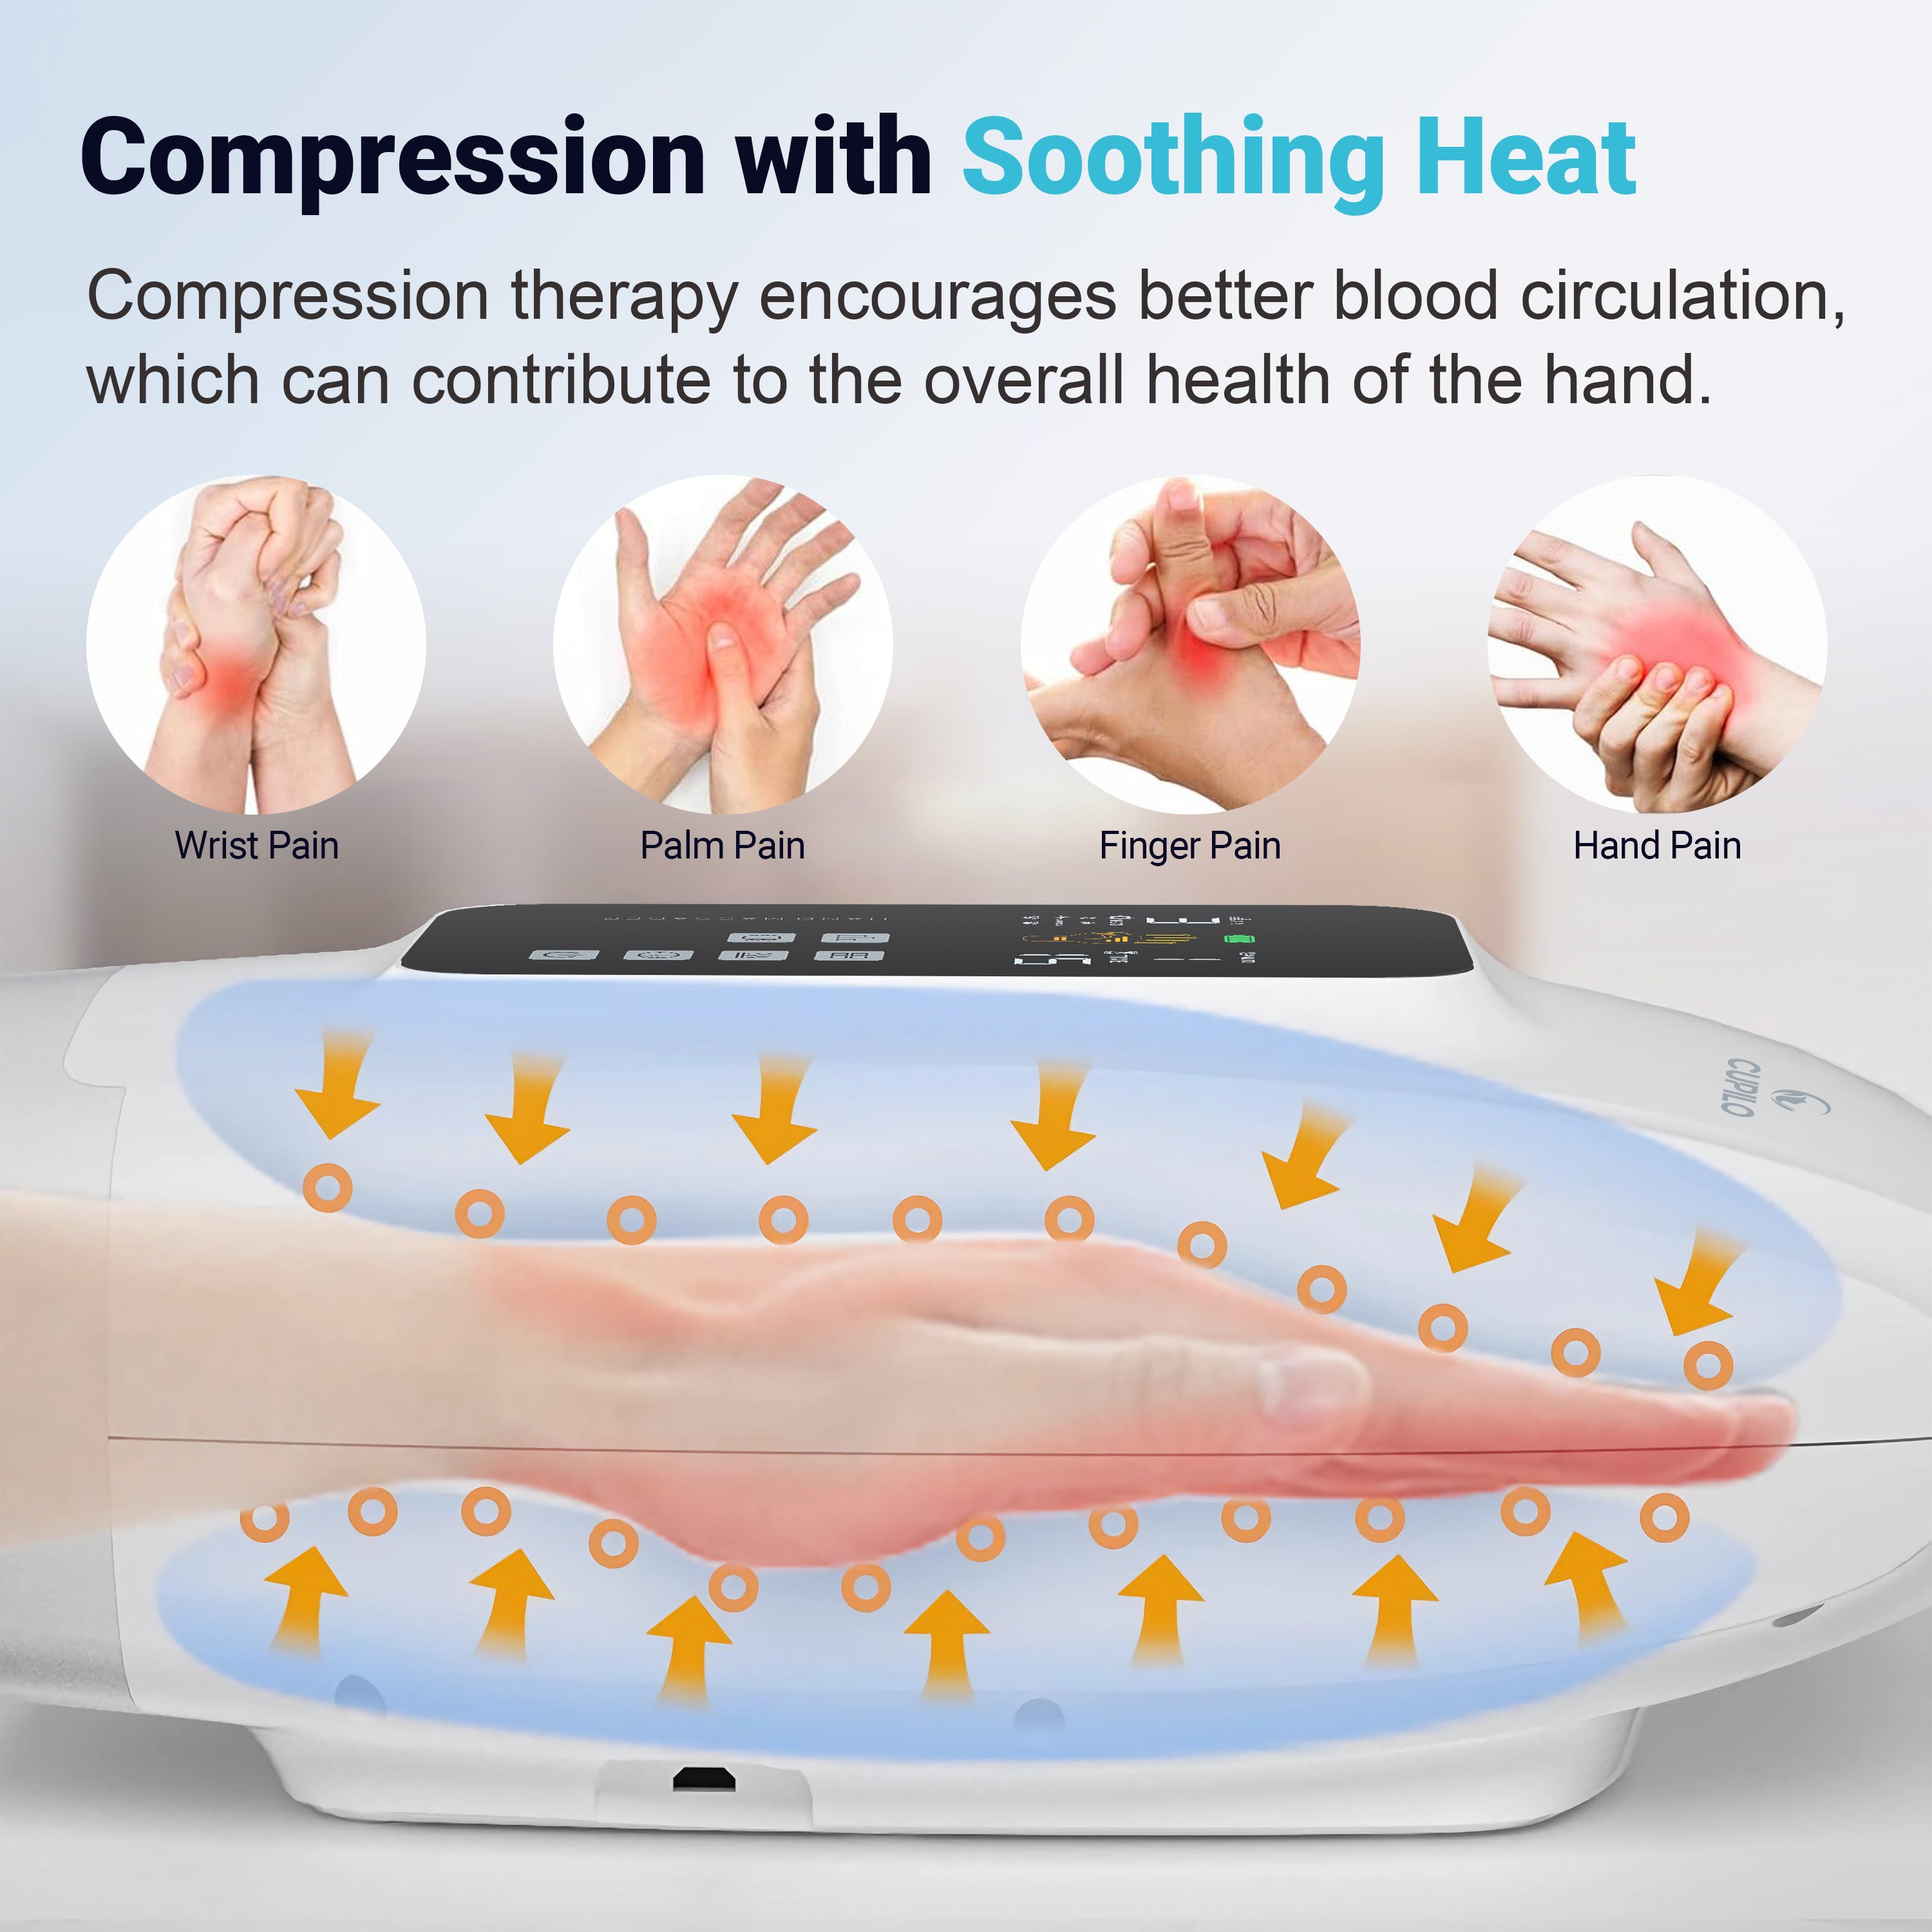 CuPiLo Hand Massager, Cordless Hand Massager with Heat and Compression